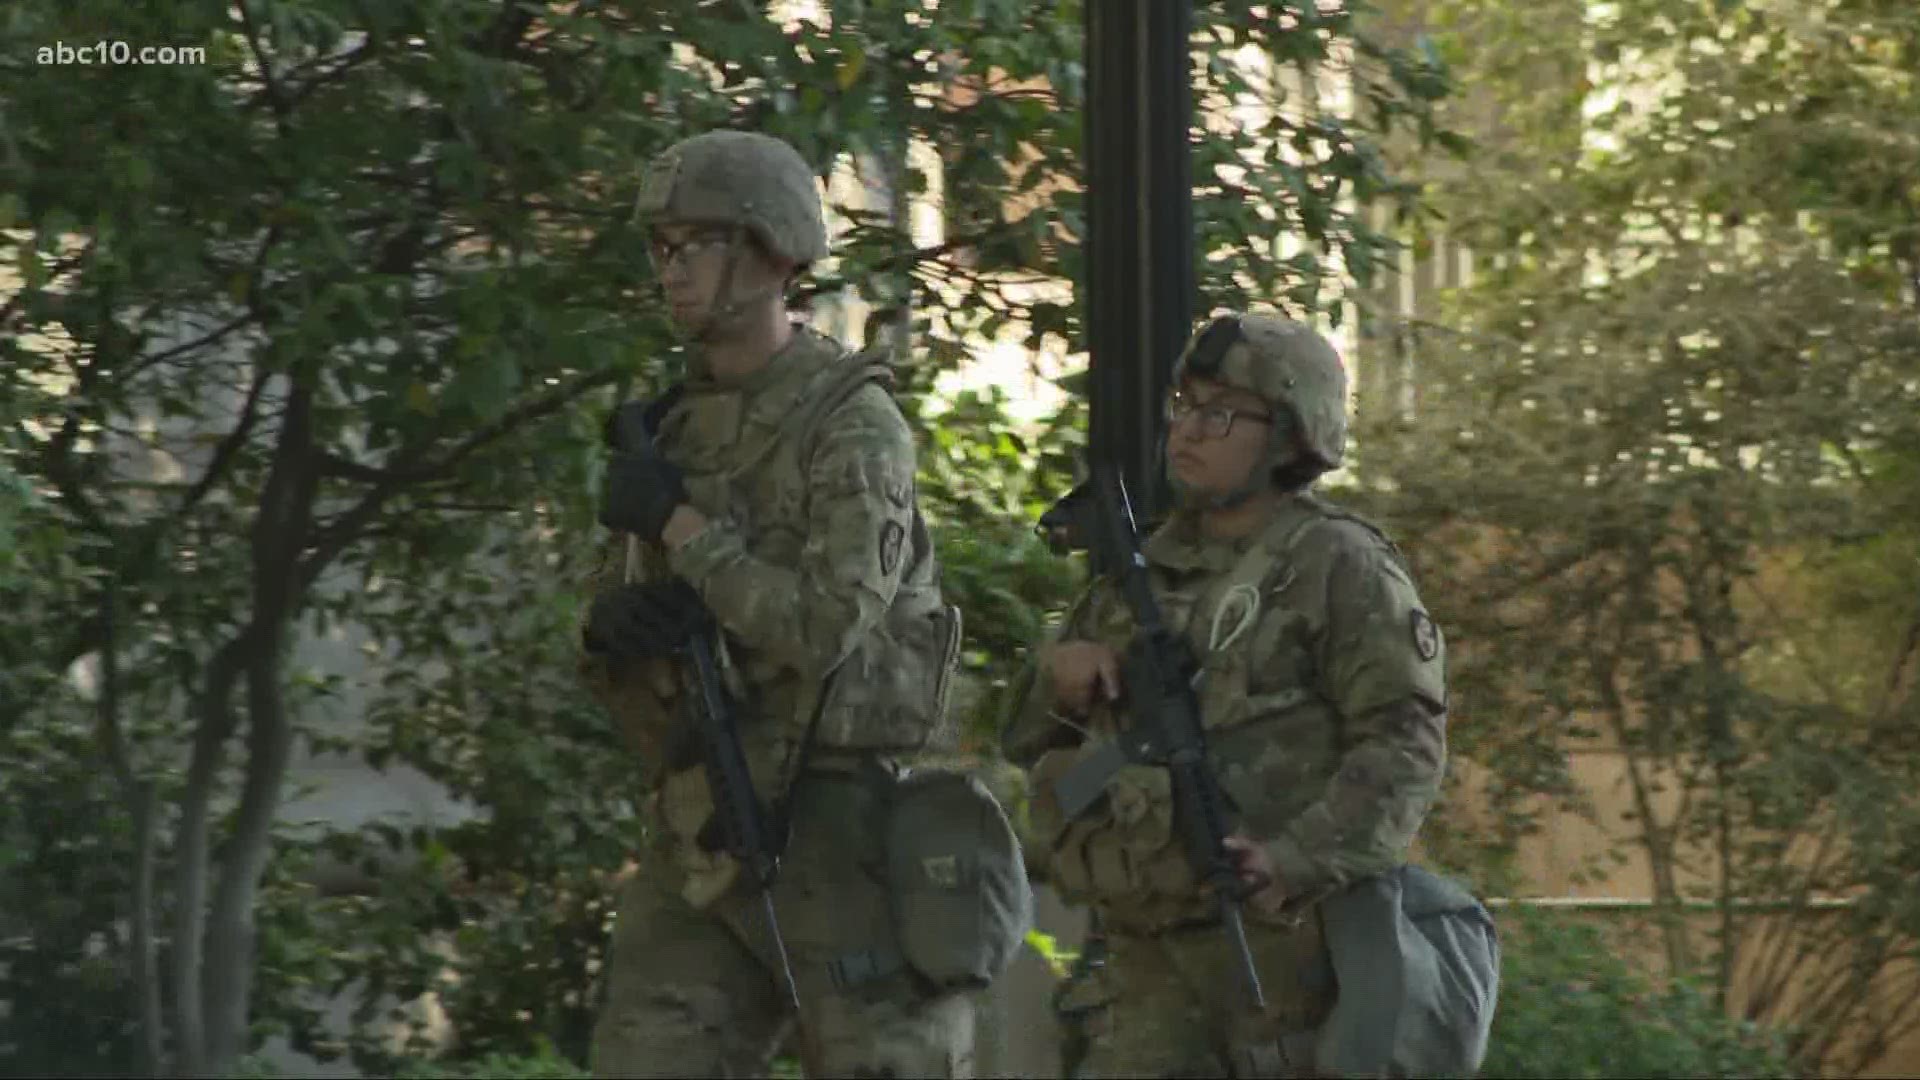 The National Guard remains in Sacramento on Wednesday as the city continues its curfew. The Guard is also helping protect the Capitol and businesses.